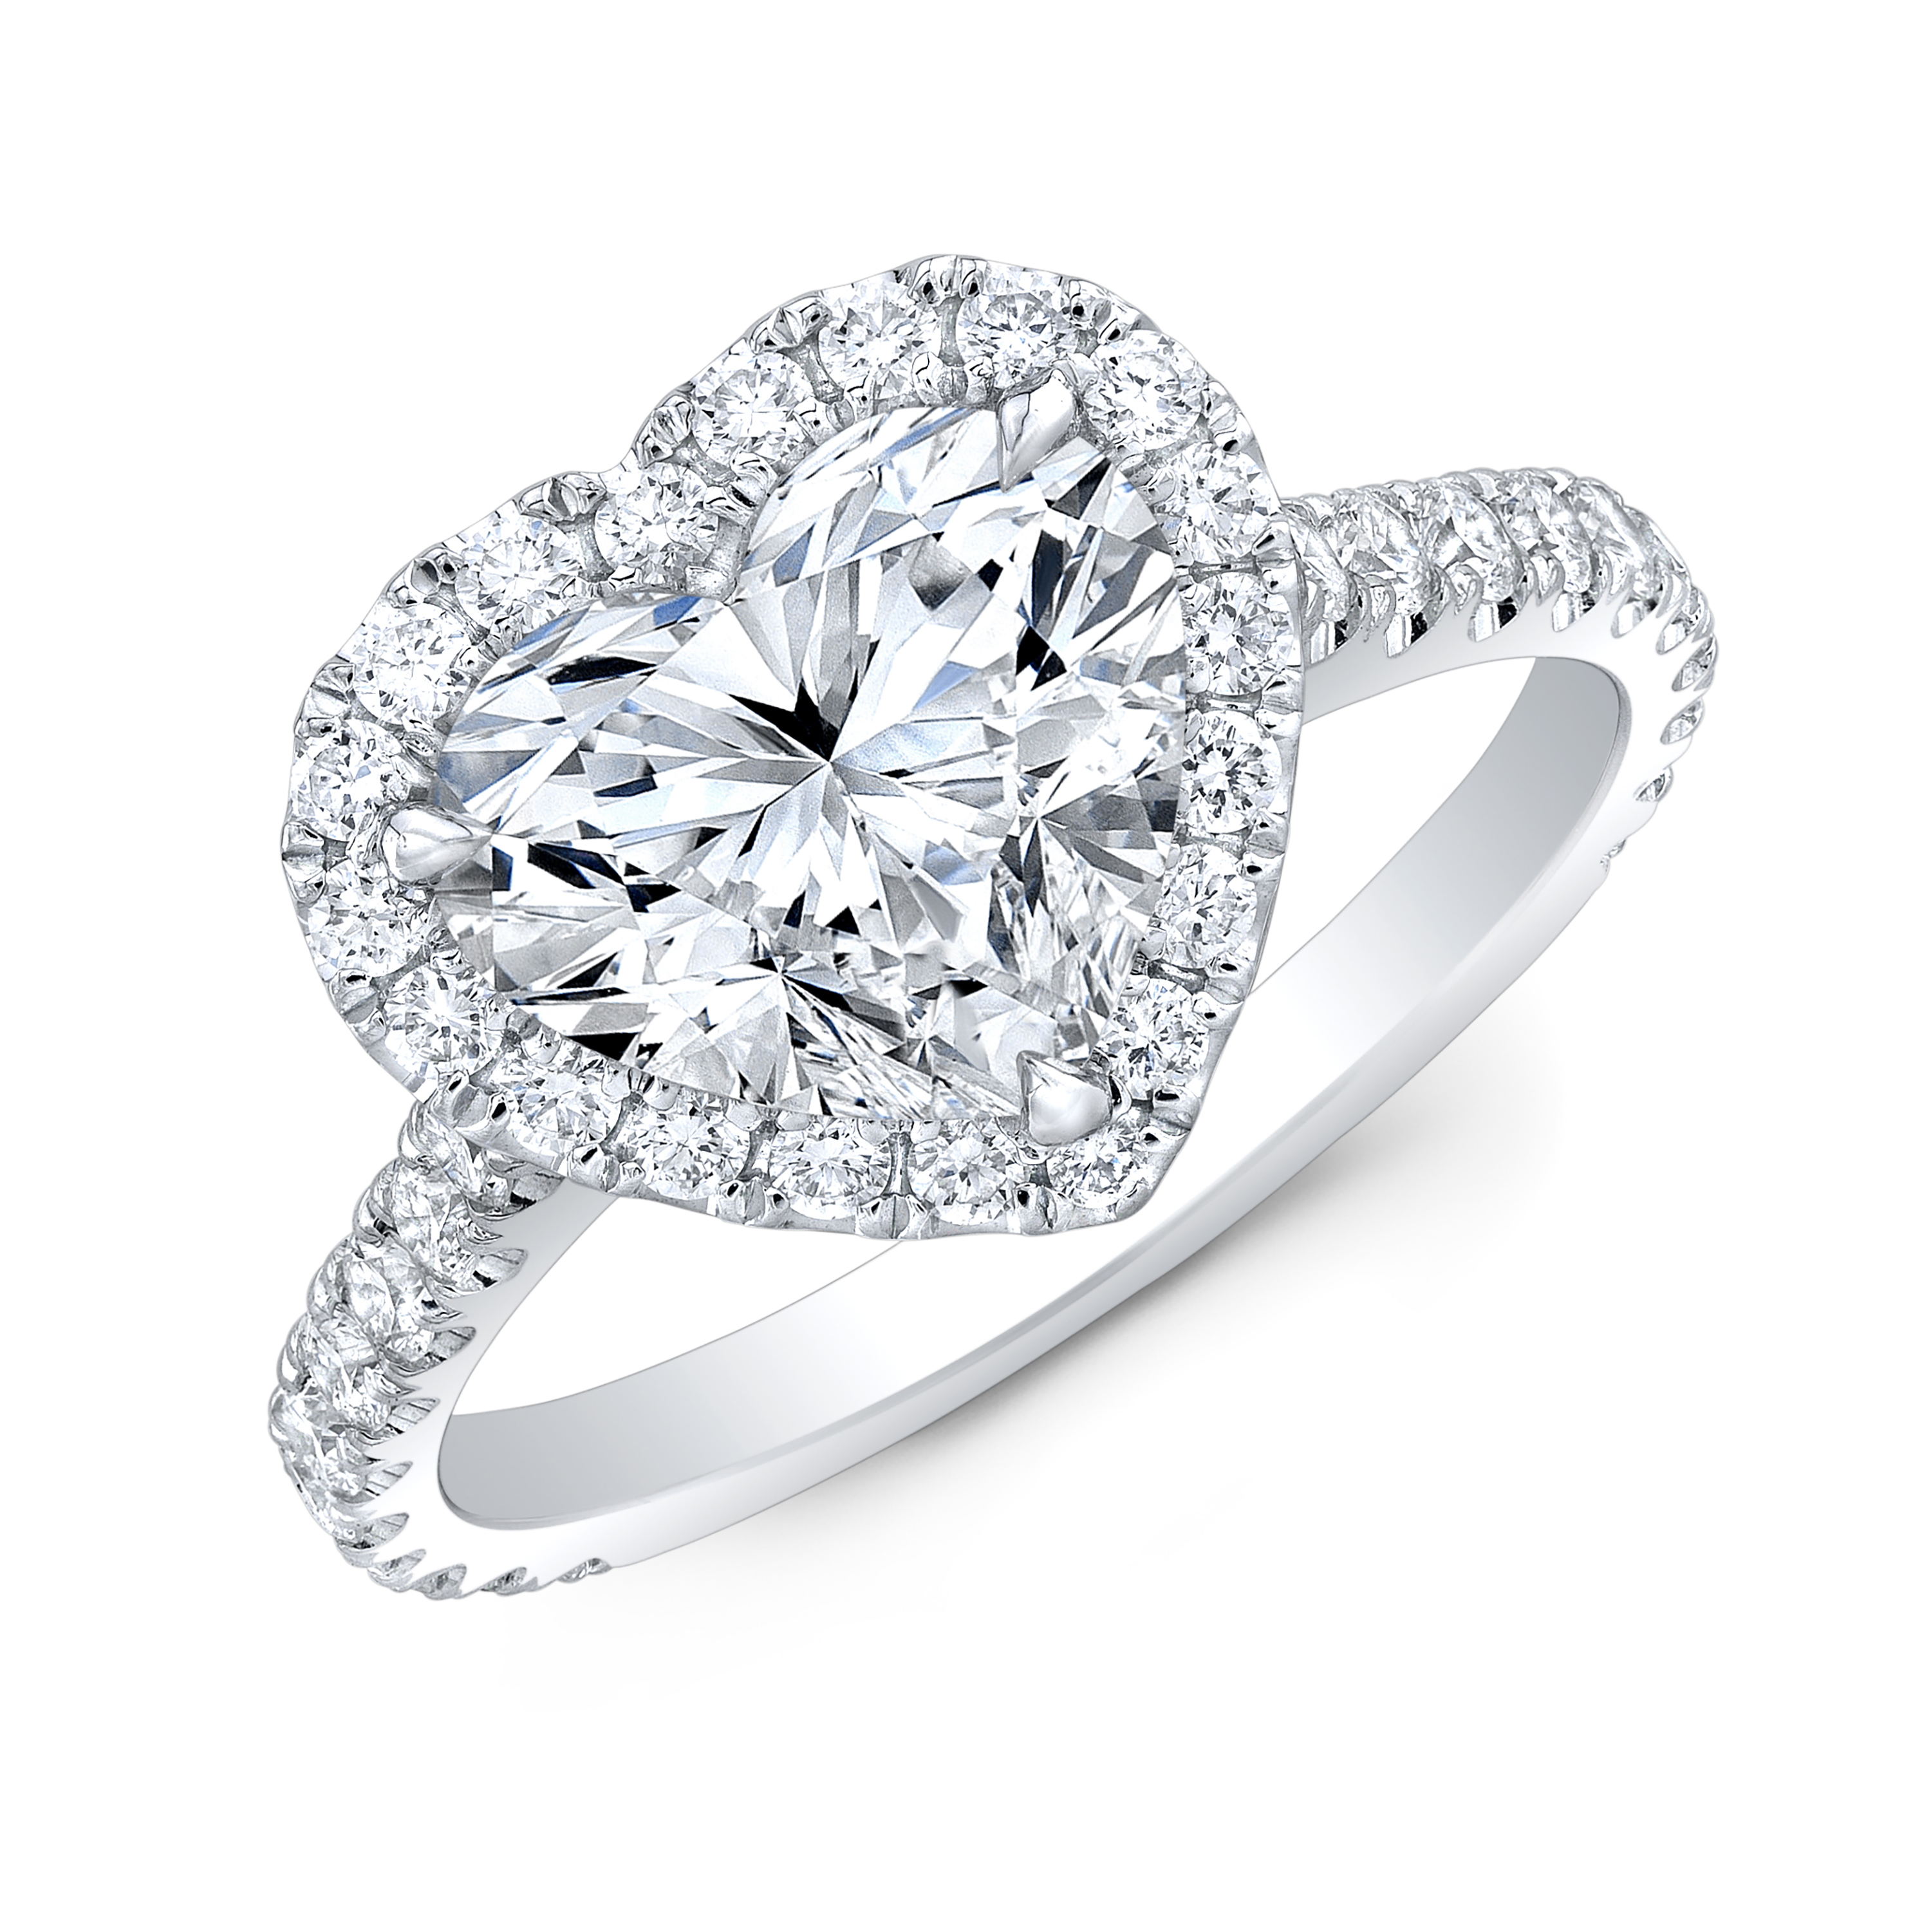 Heart Shaped Diamond Engagement Ring Buying Guide | With Clarity